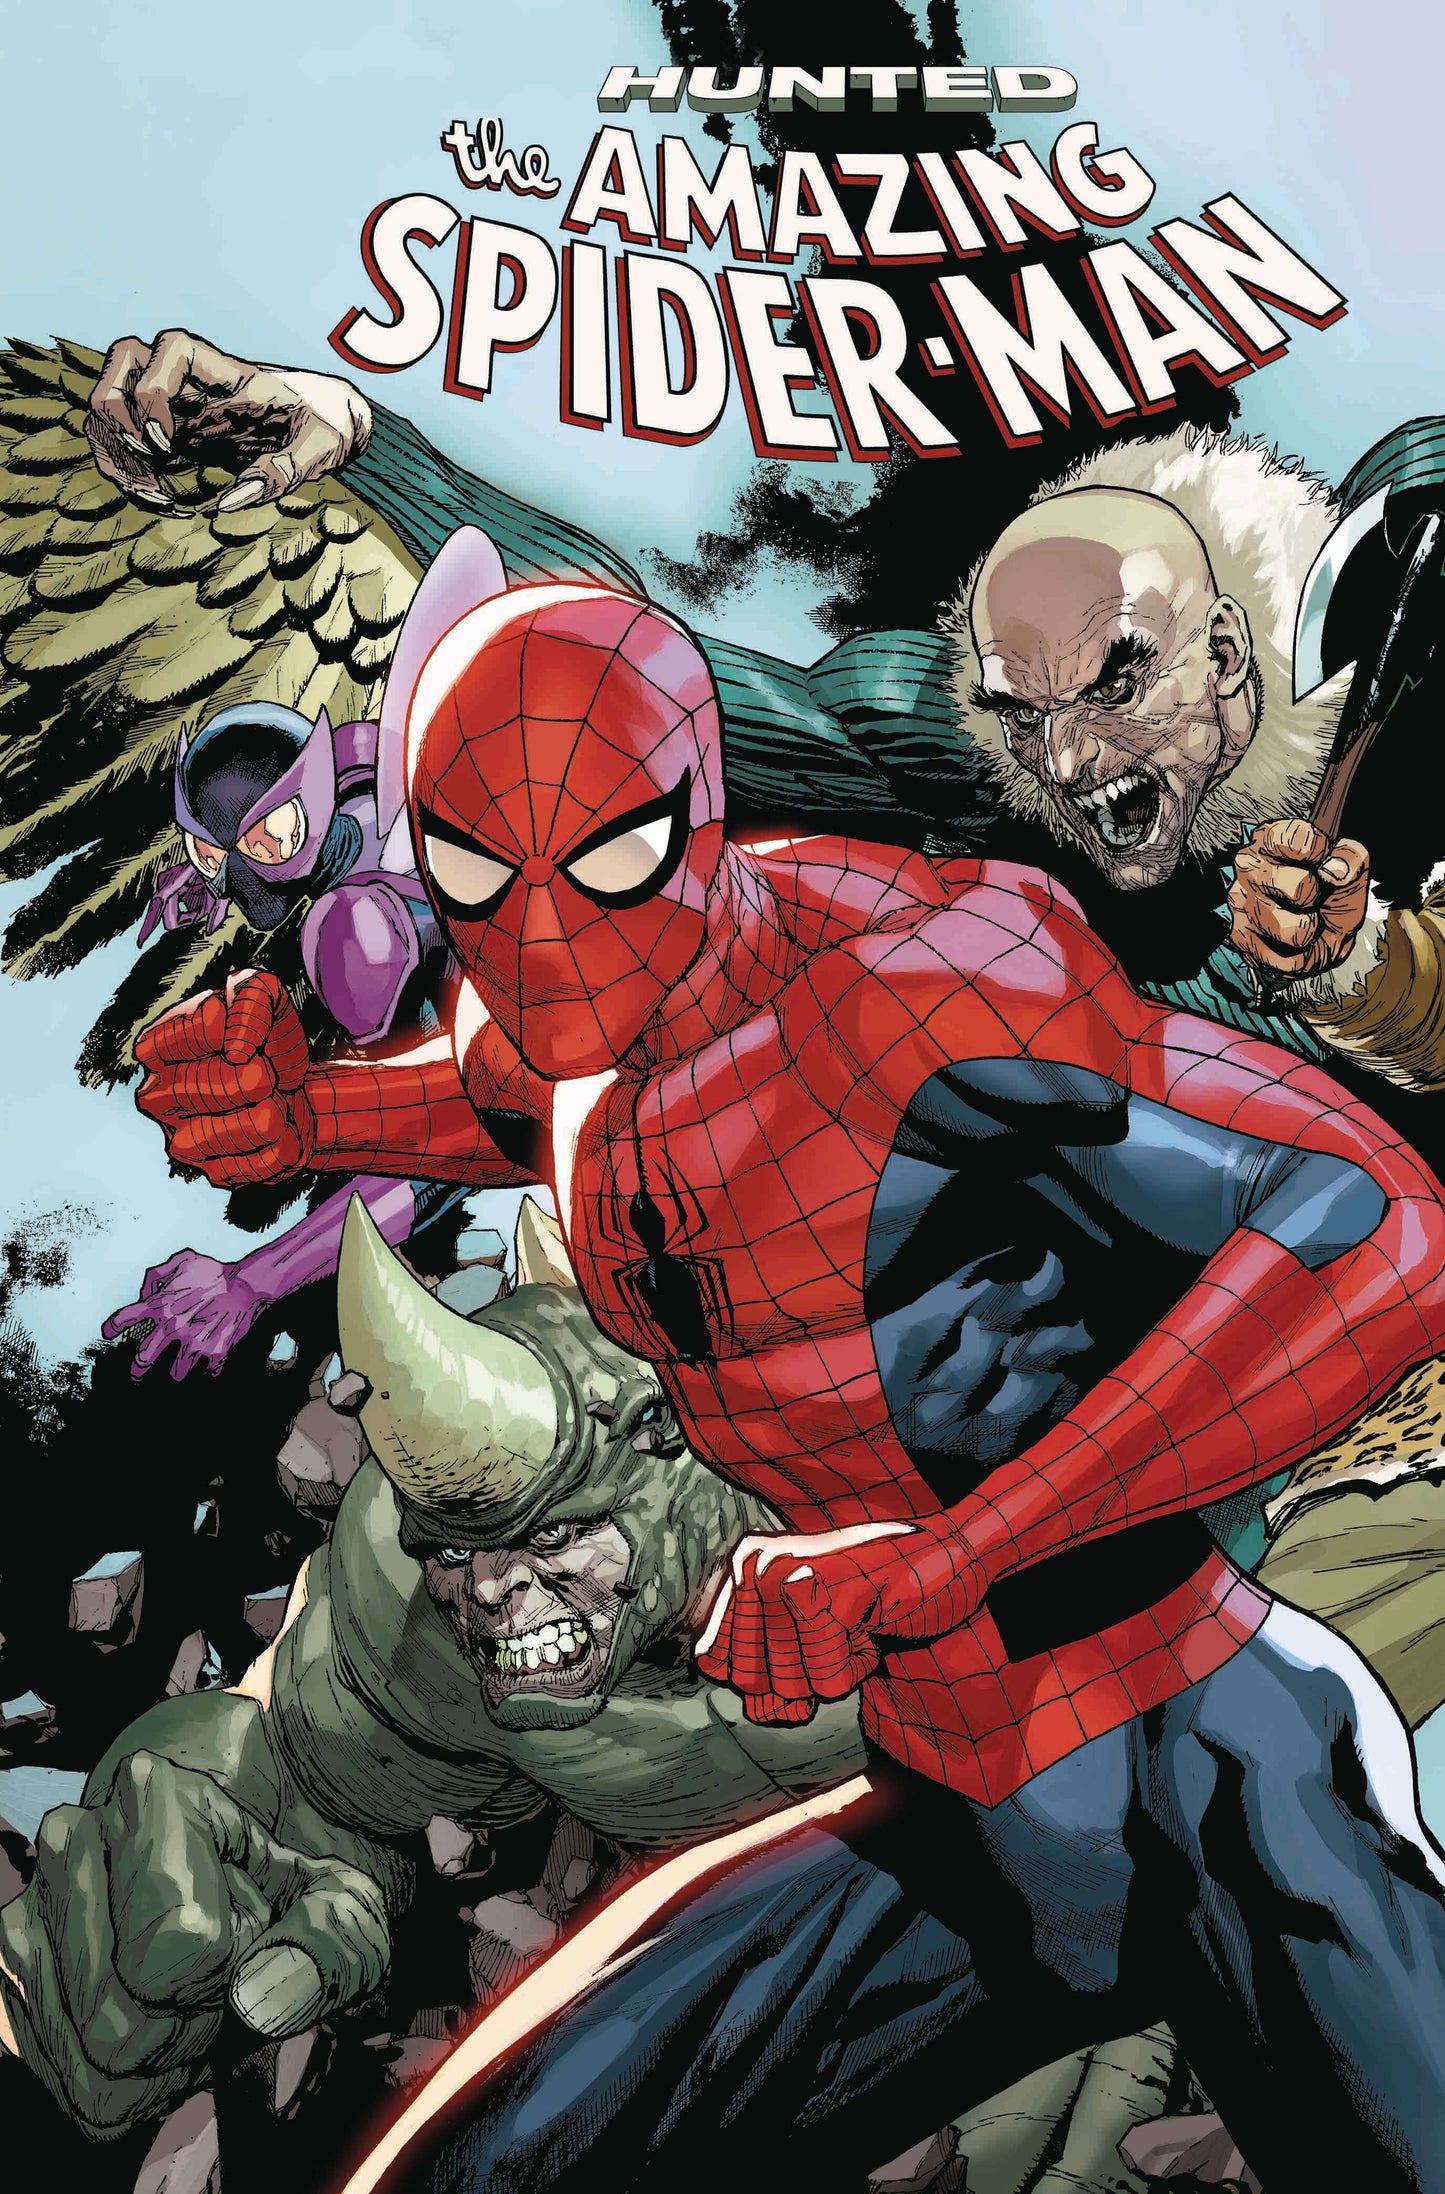 AMAZING SPIDER-MAN #17 Leinil Francis Yu CONNECTING Variant Nick Spencer (03/13/2019) MARVEL